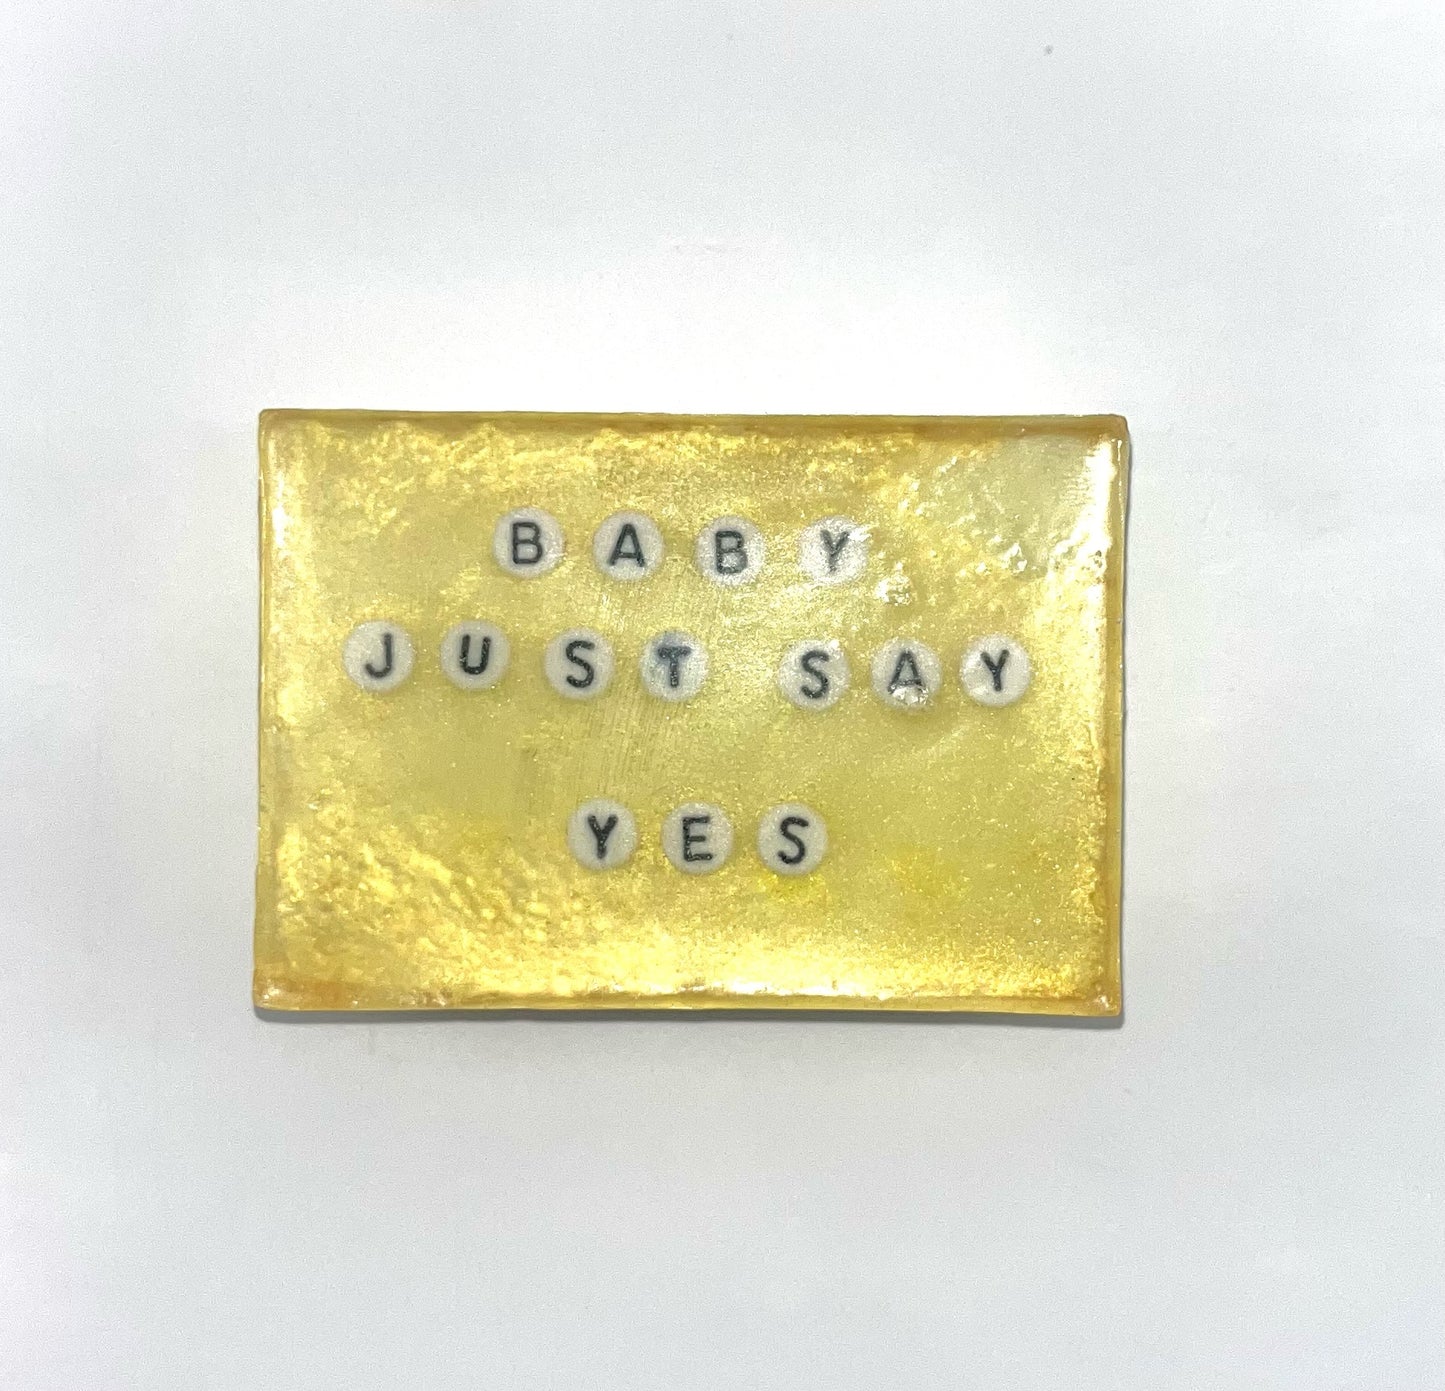 Say Yes Soap